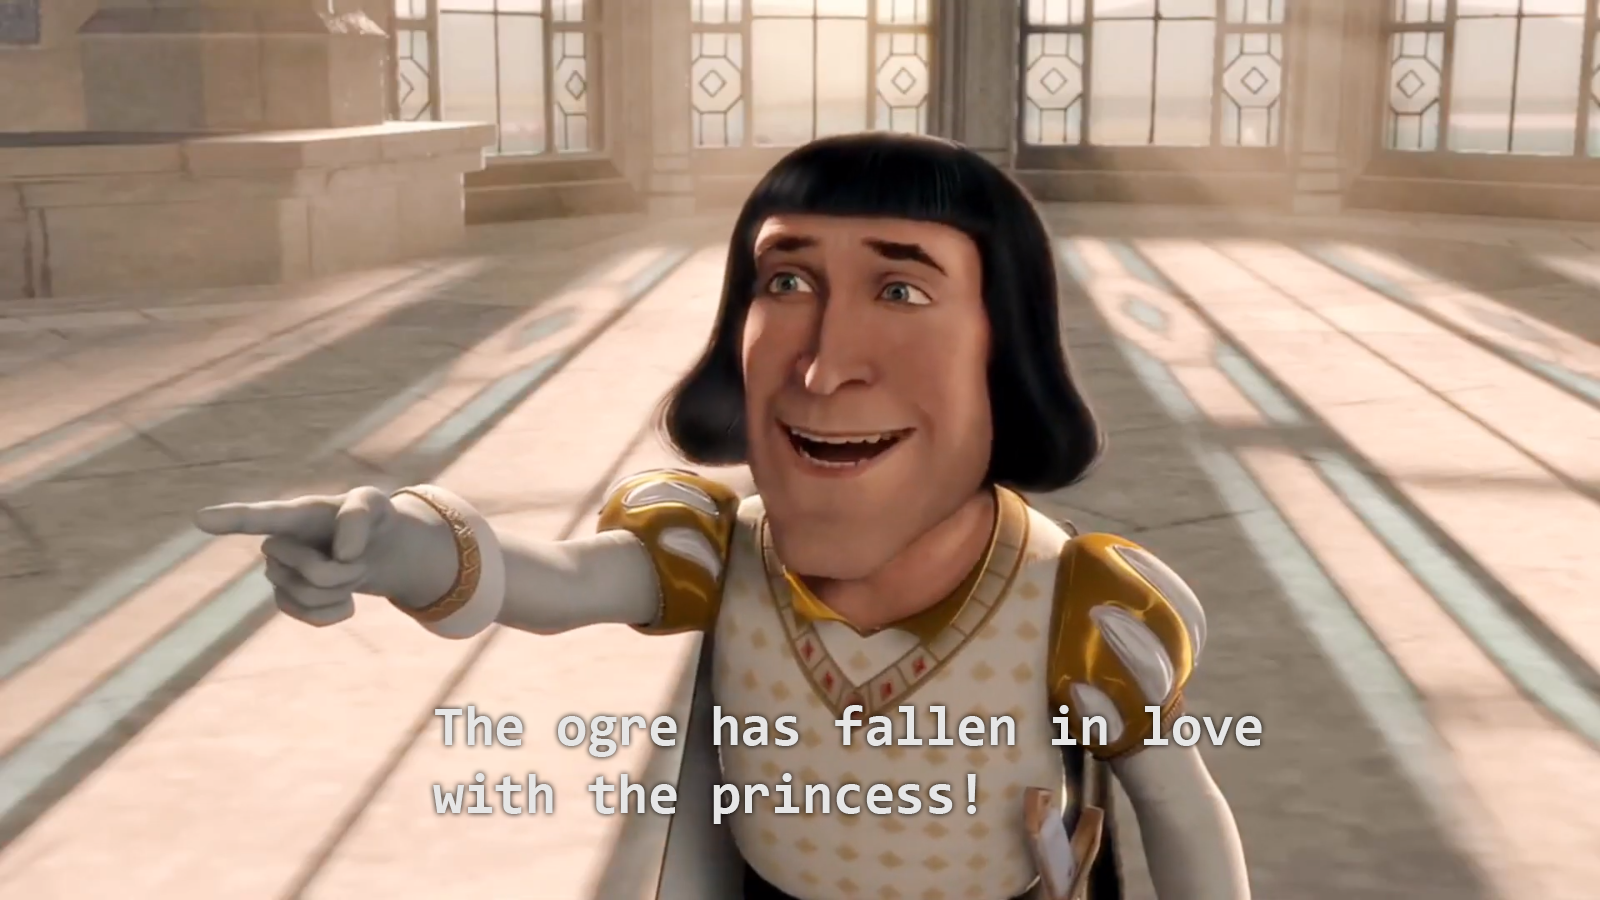 High Quality The Ogre Has Fallen In Love With the Princess! (HD) Blank Meme Template